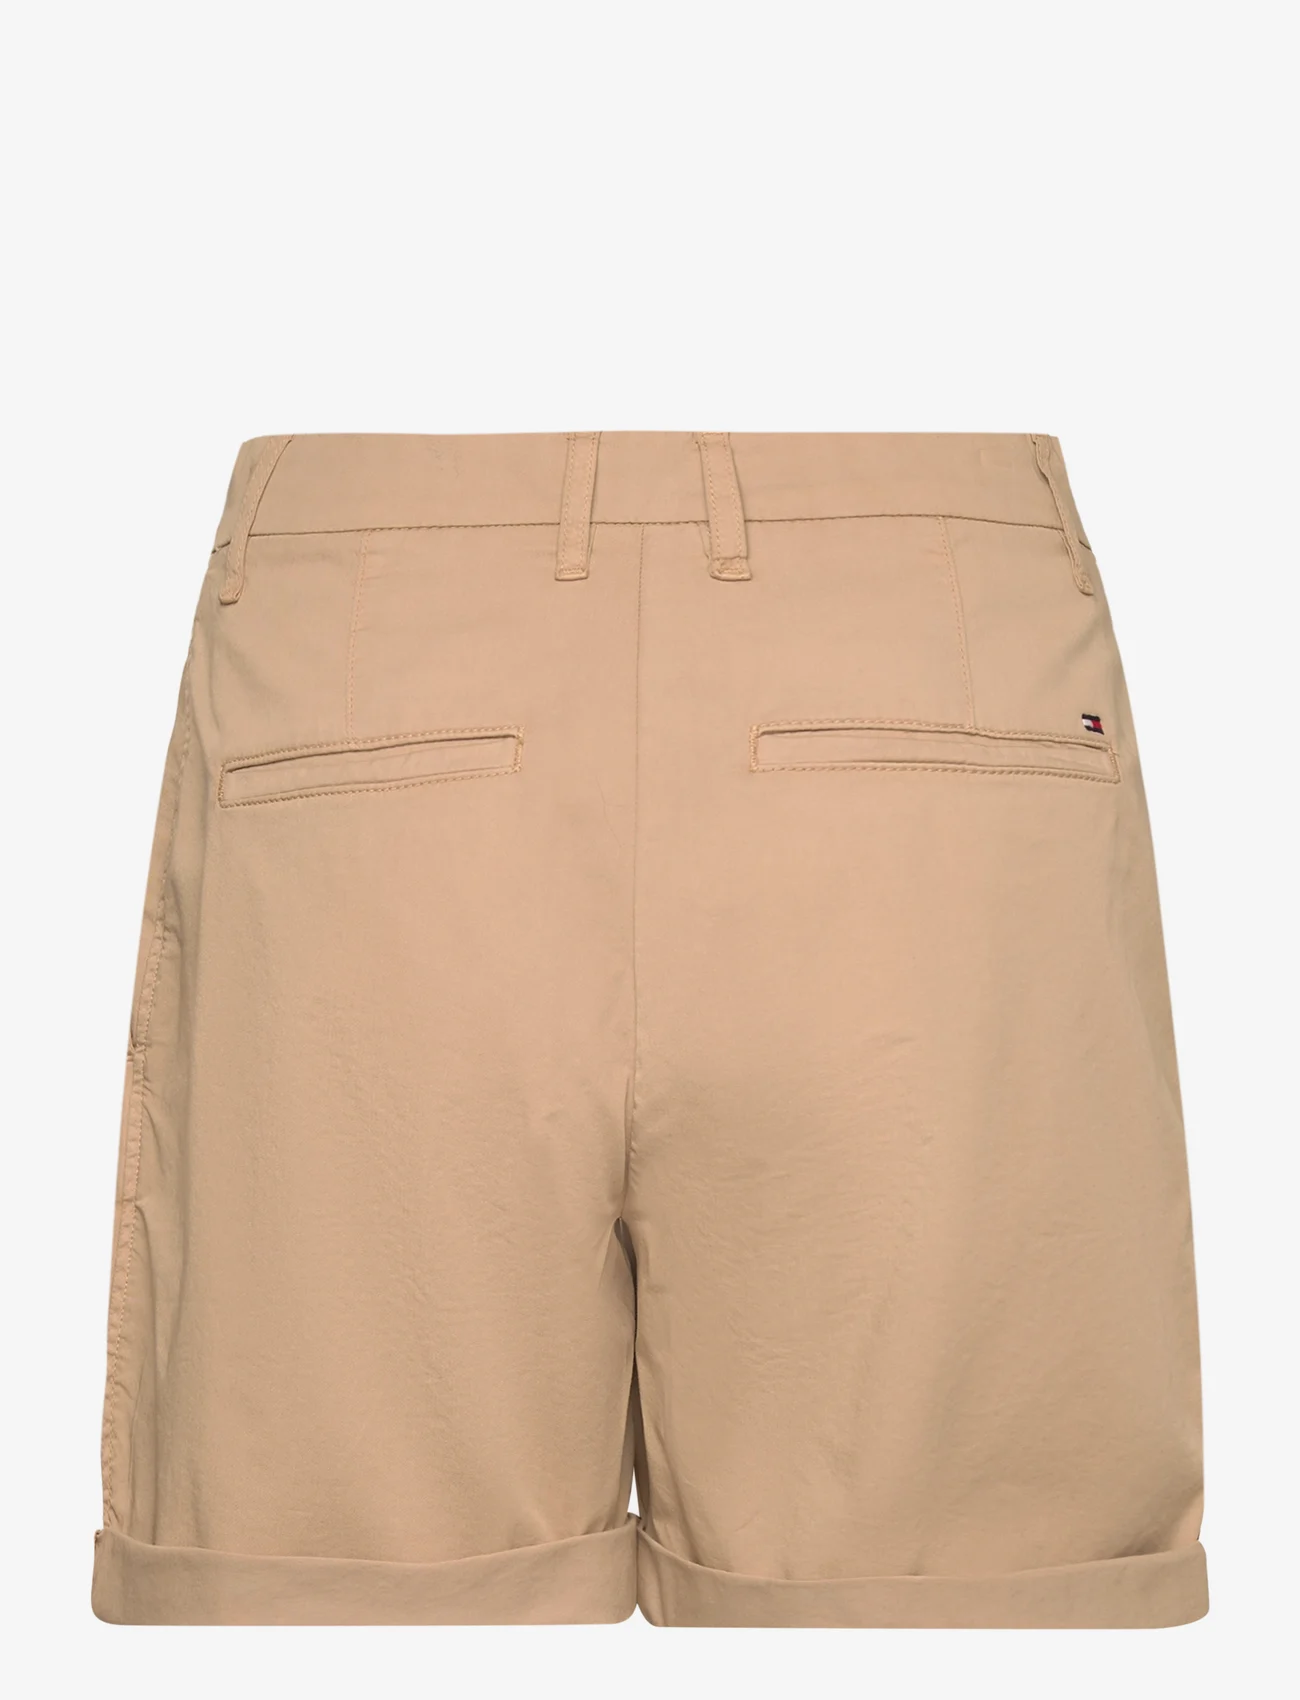 Tommy Hilfiger - CO BLEND GMD CHINO SHORT - chino shorts - beige - 1